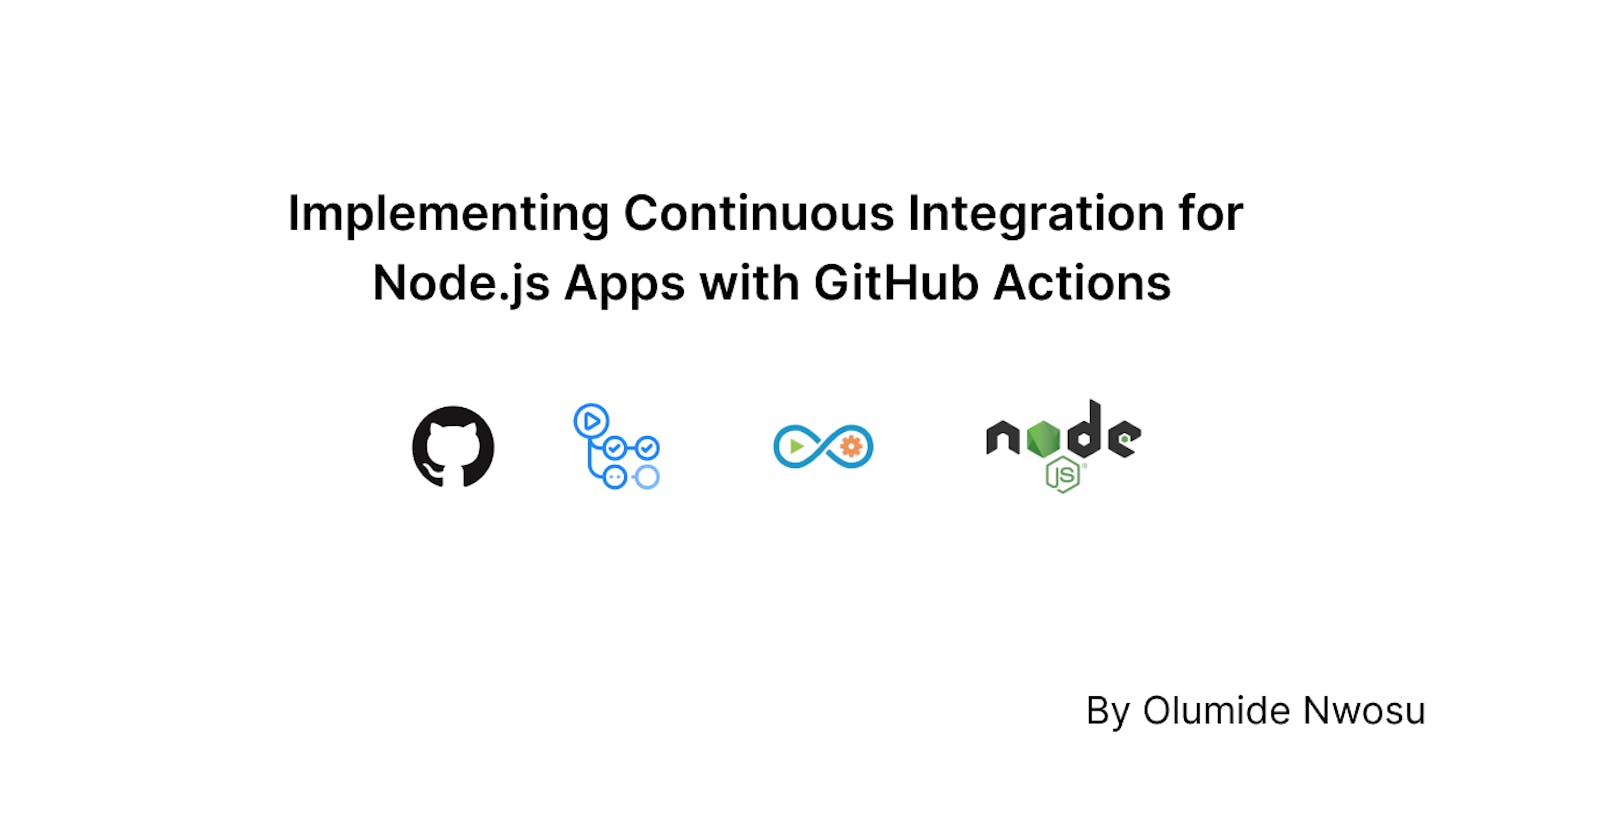 Implementing Continuous Integration for Node.js Apps with GitHub Actions